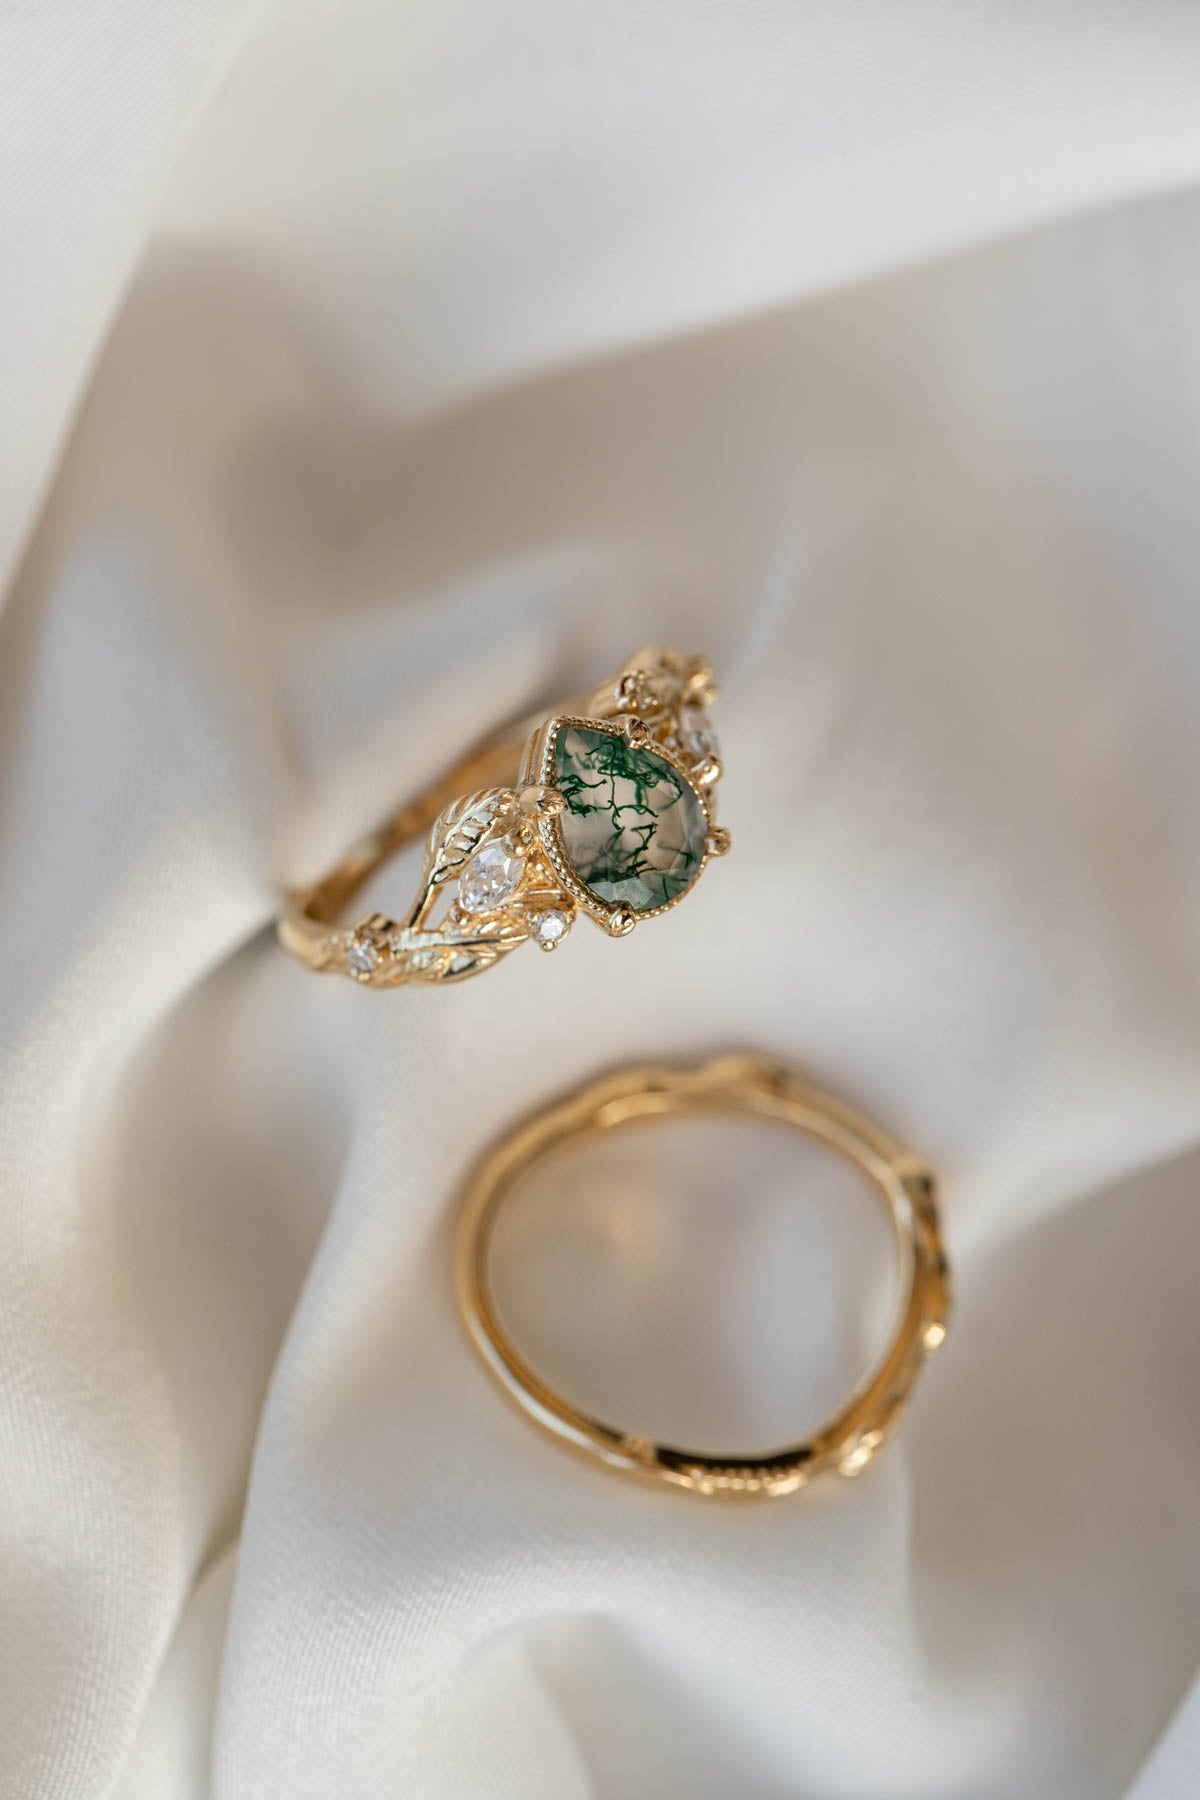 Pear moss agate engagement ring with diamonds, gold leaf branch proposal ring / Patricia - Eden Garden Jewelry™